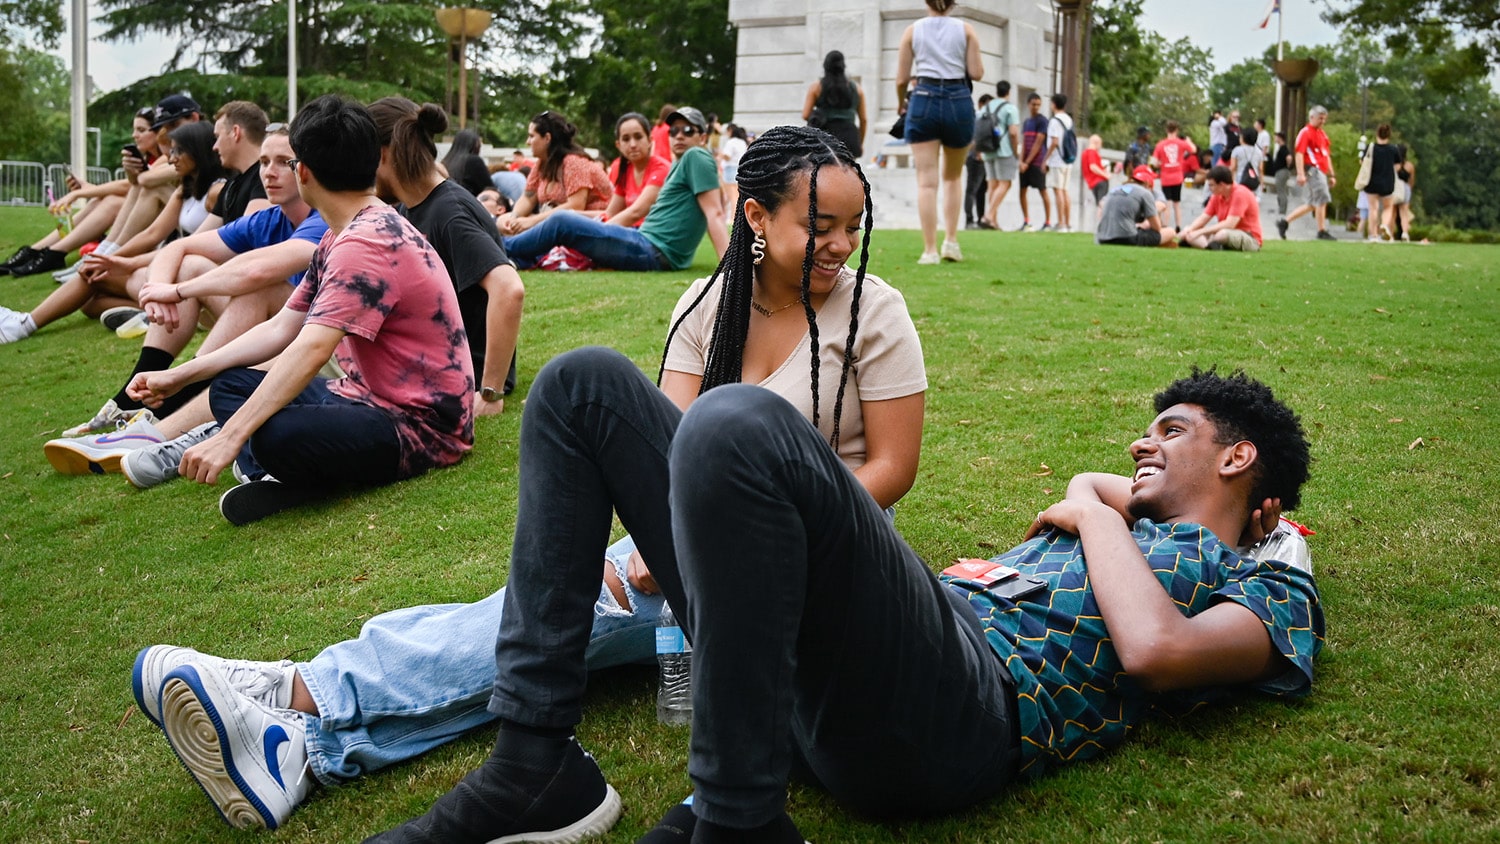 At the base of the Belltower, groups of students lounge in the green grass.